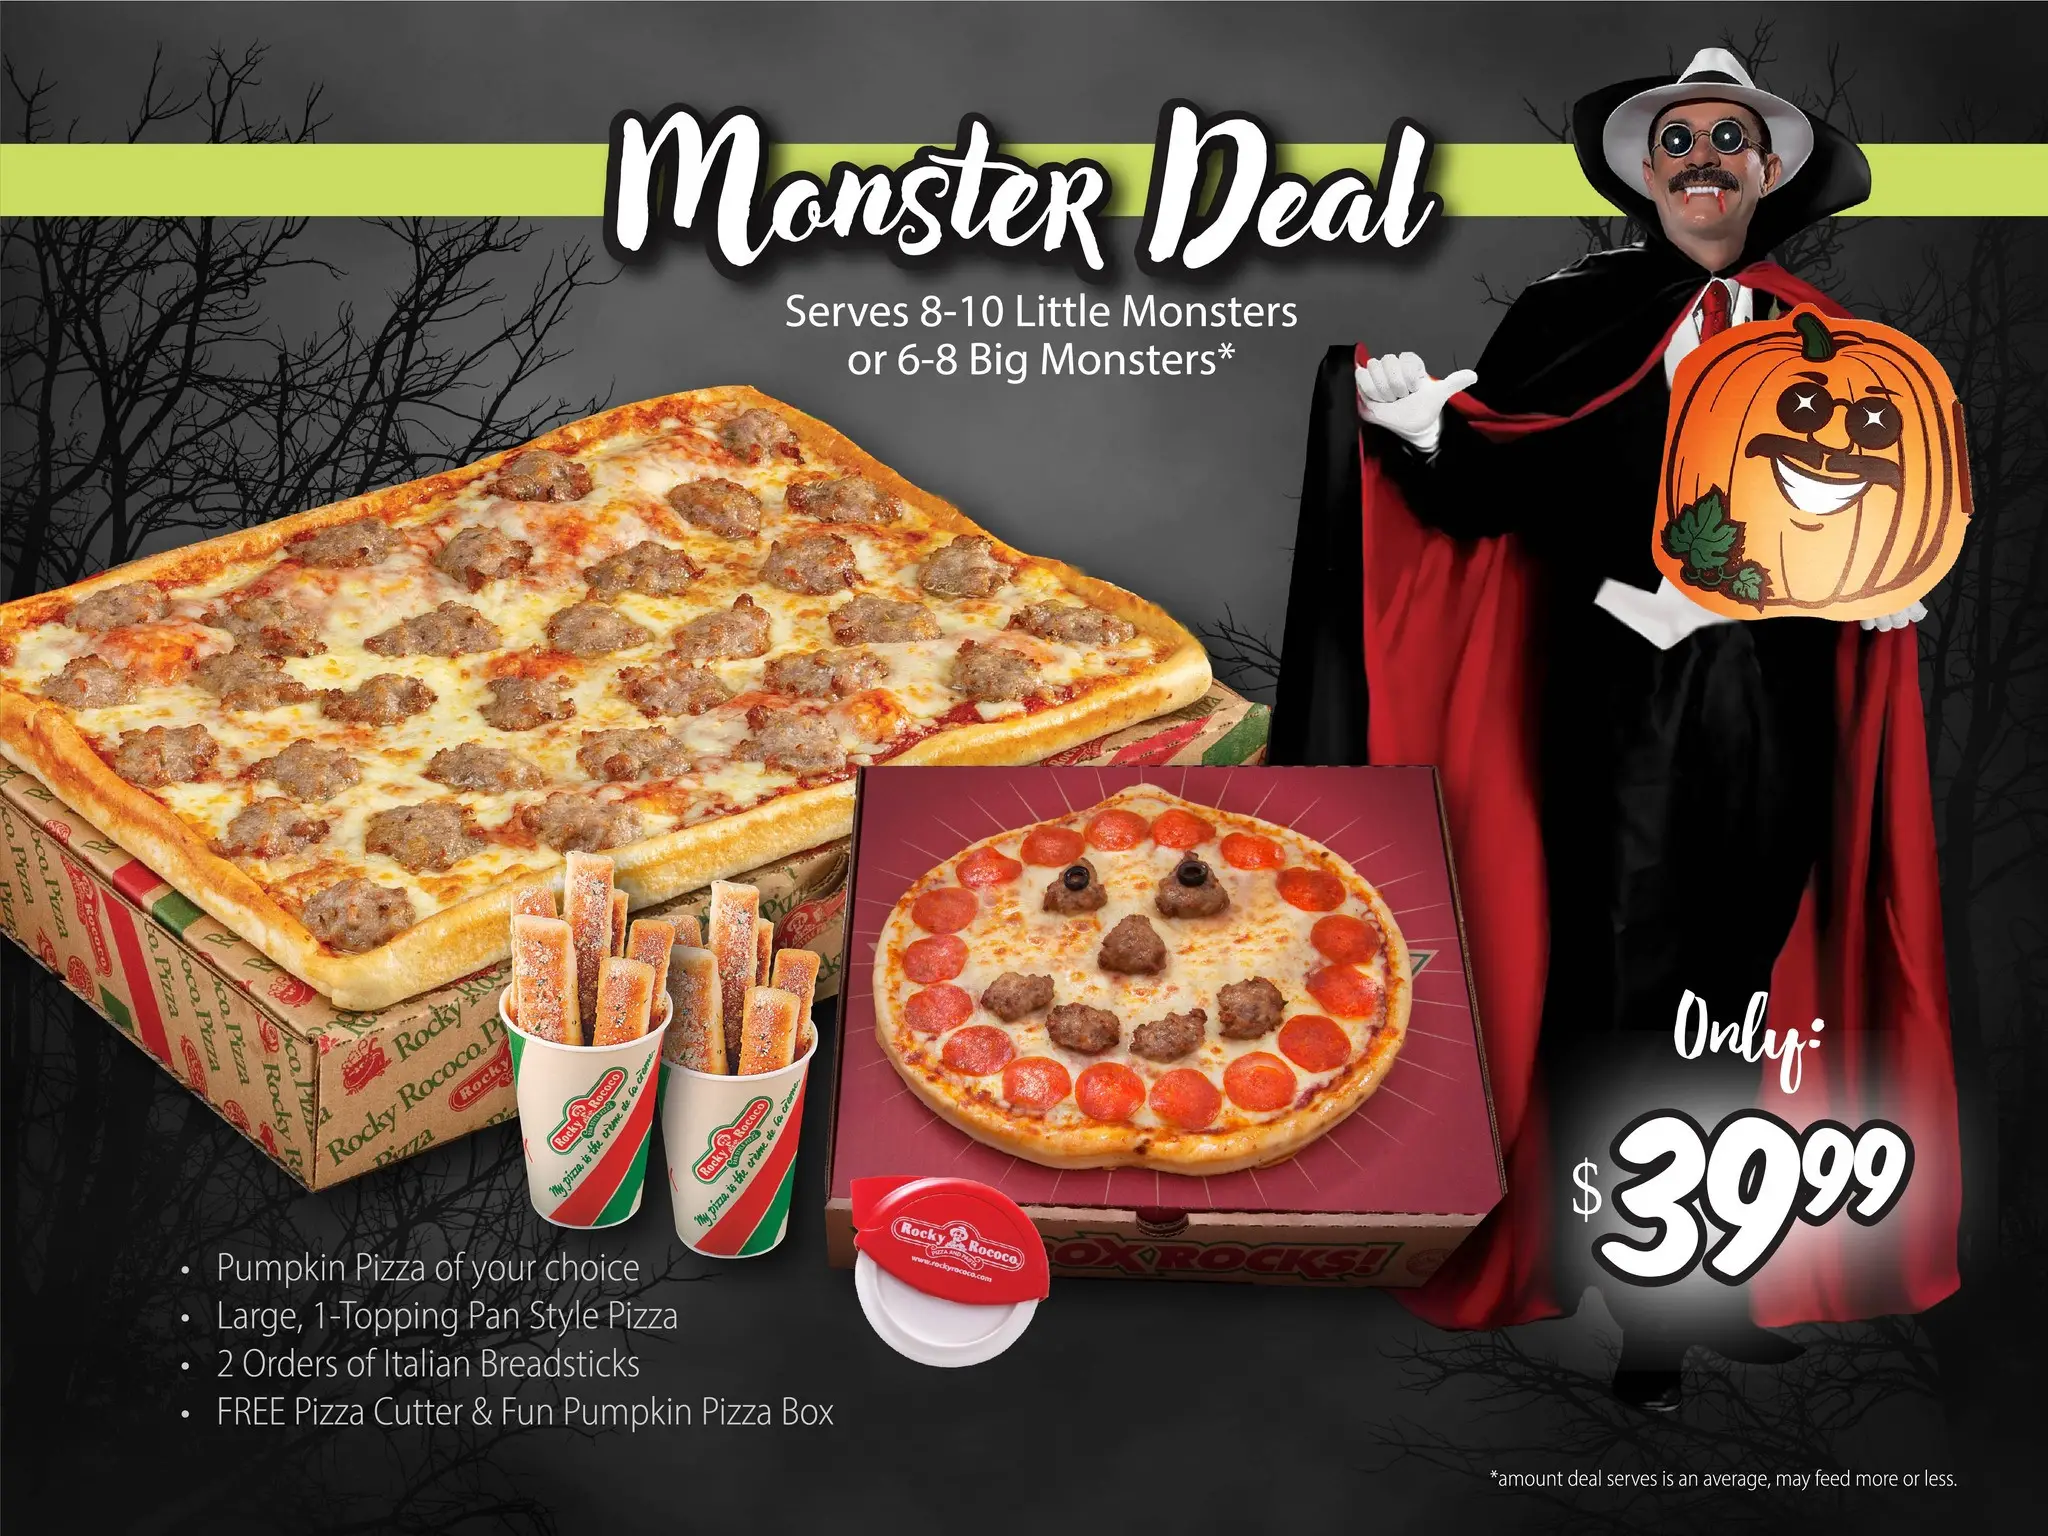 Rocky Rococo Pizza and Pasta Halloween Get Monster Deal (Pumpkin Pizza, Large Pan Pizza, 2 Italian Breadsticks) for $39.99